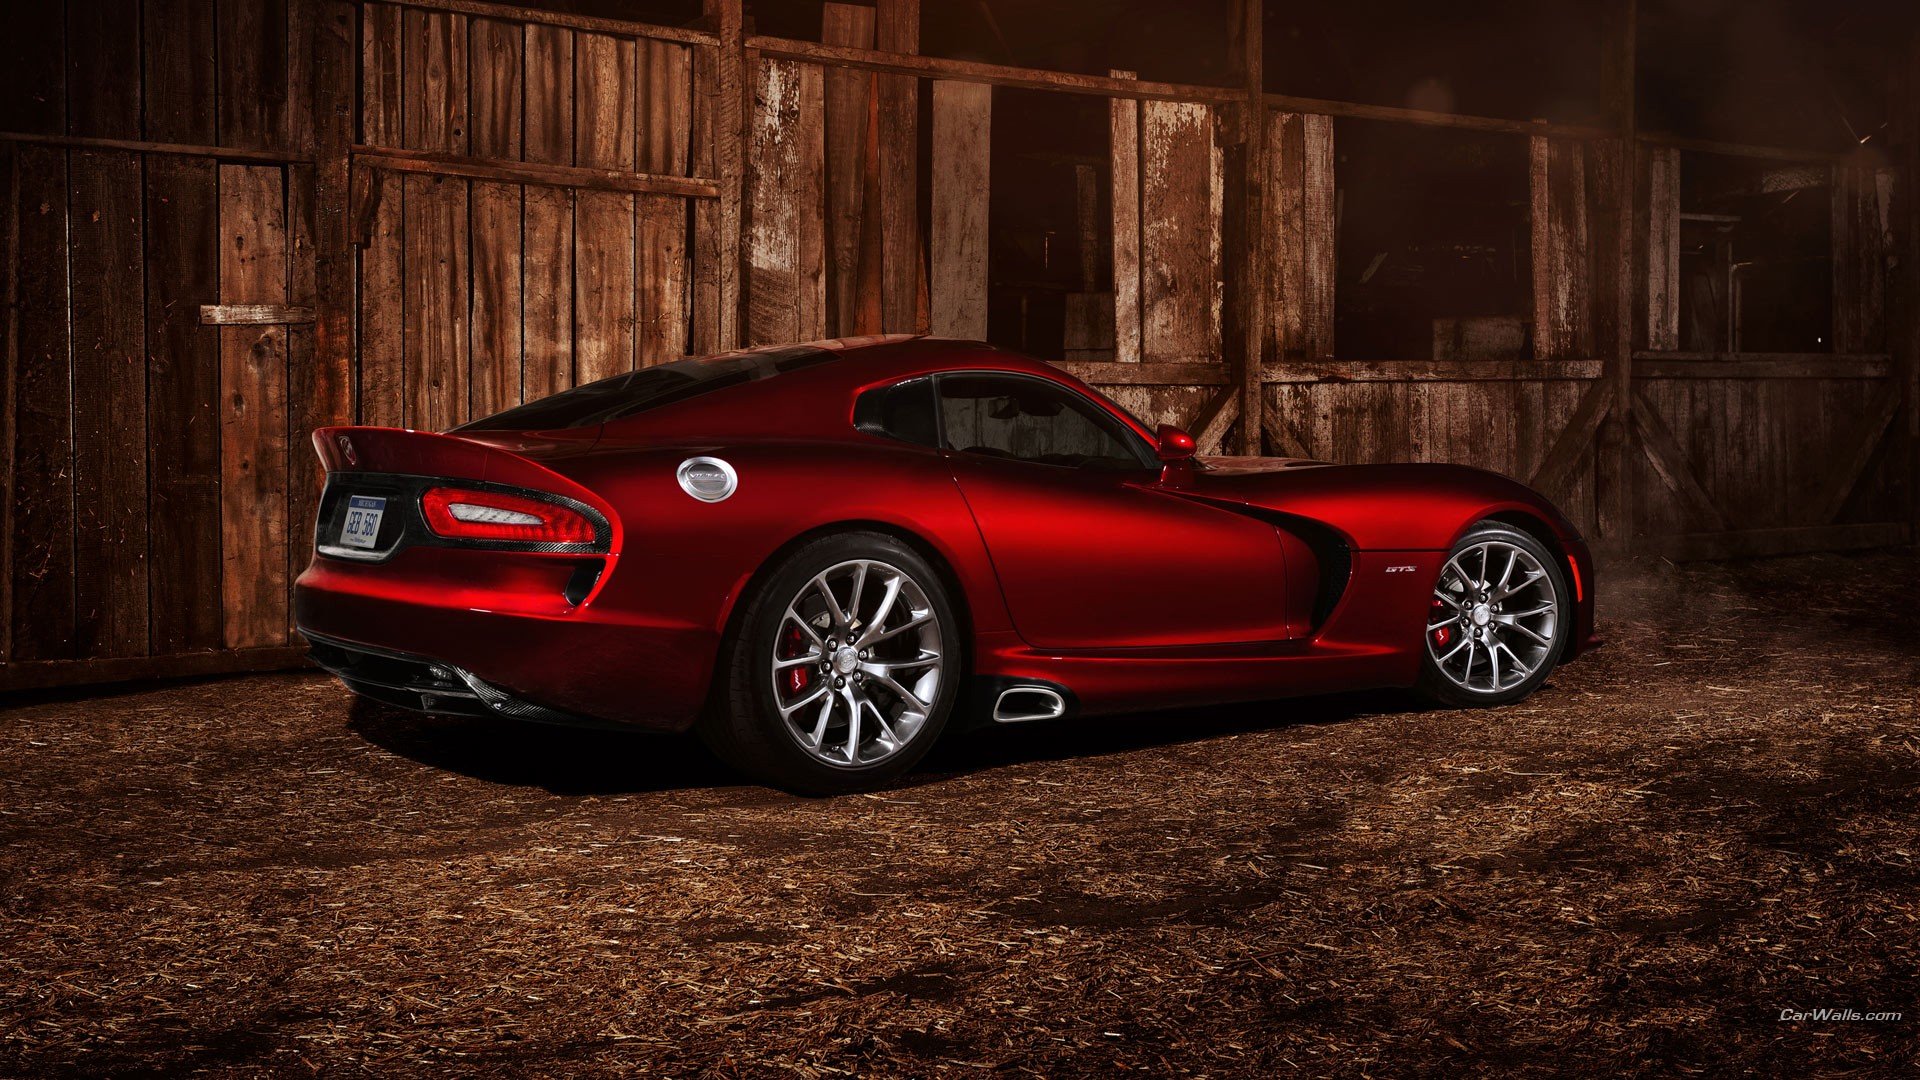 Best Dodge Viper wallpaper ID:8254 for High Resolution hd 1080p PC